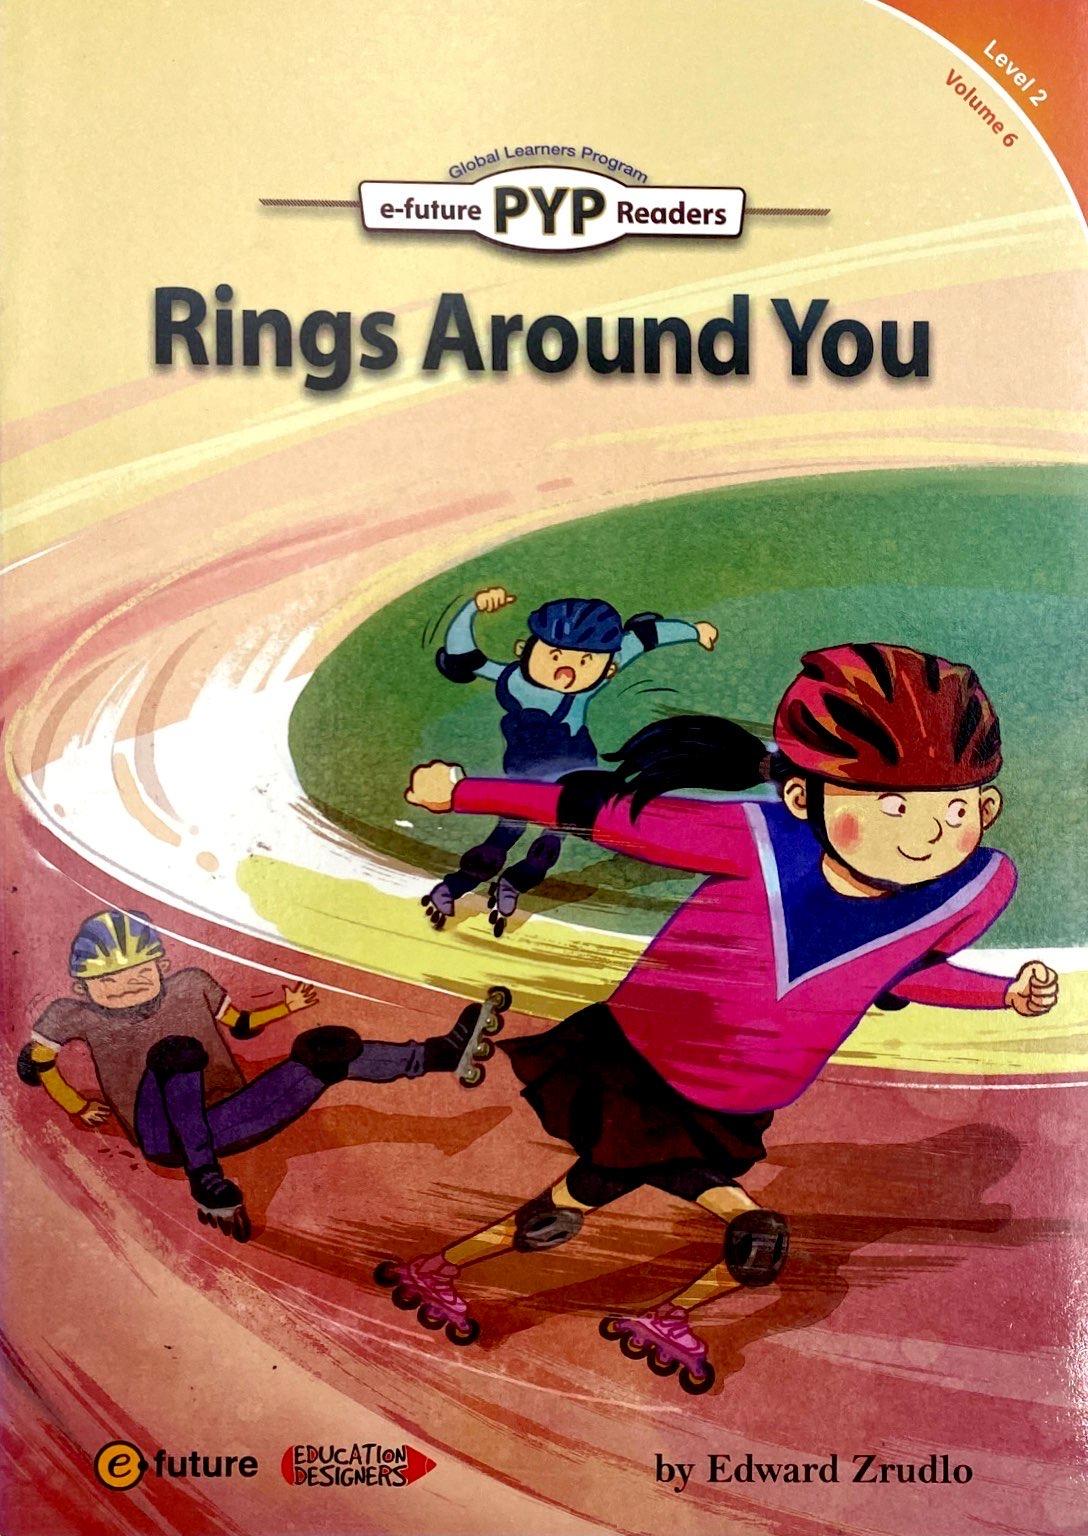 PYP Readers. 2-06/Rings Around You